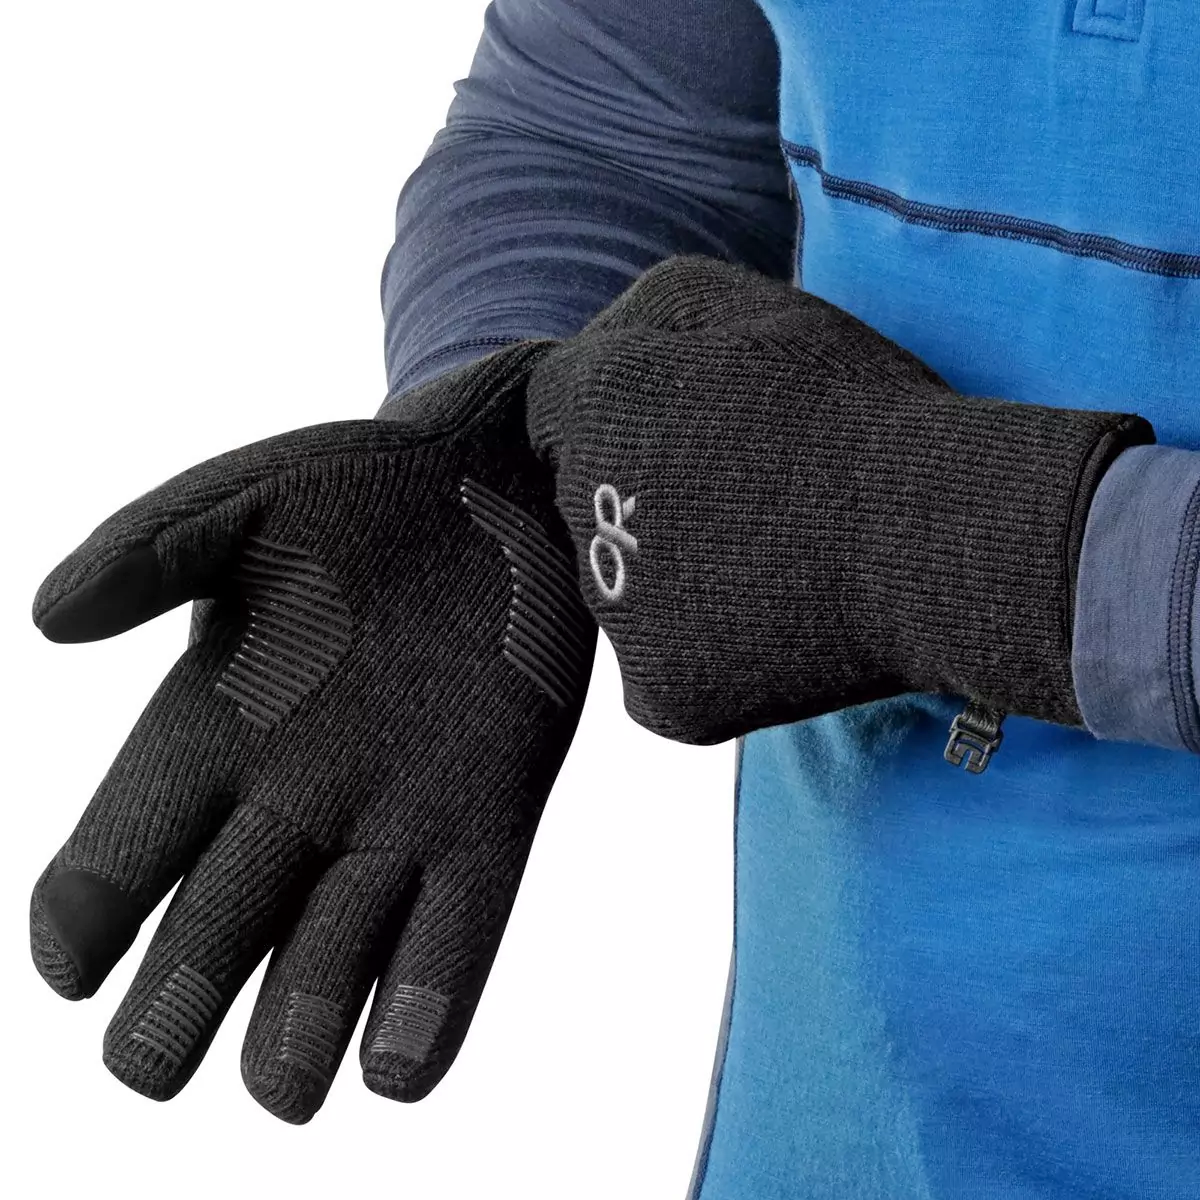 How good are Outdoor Research Flurry Sensor Gloves? We Think Great!